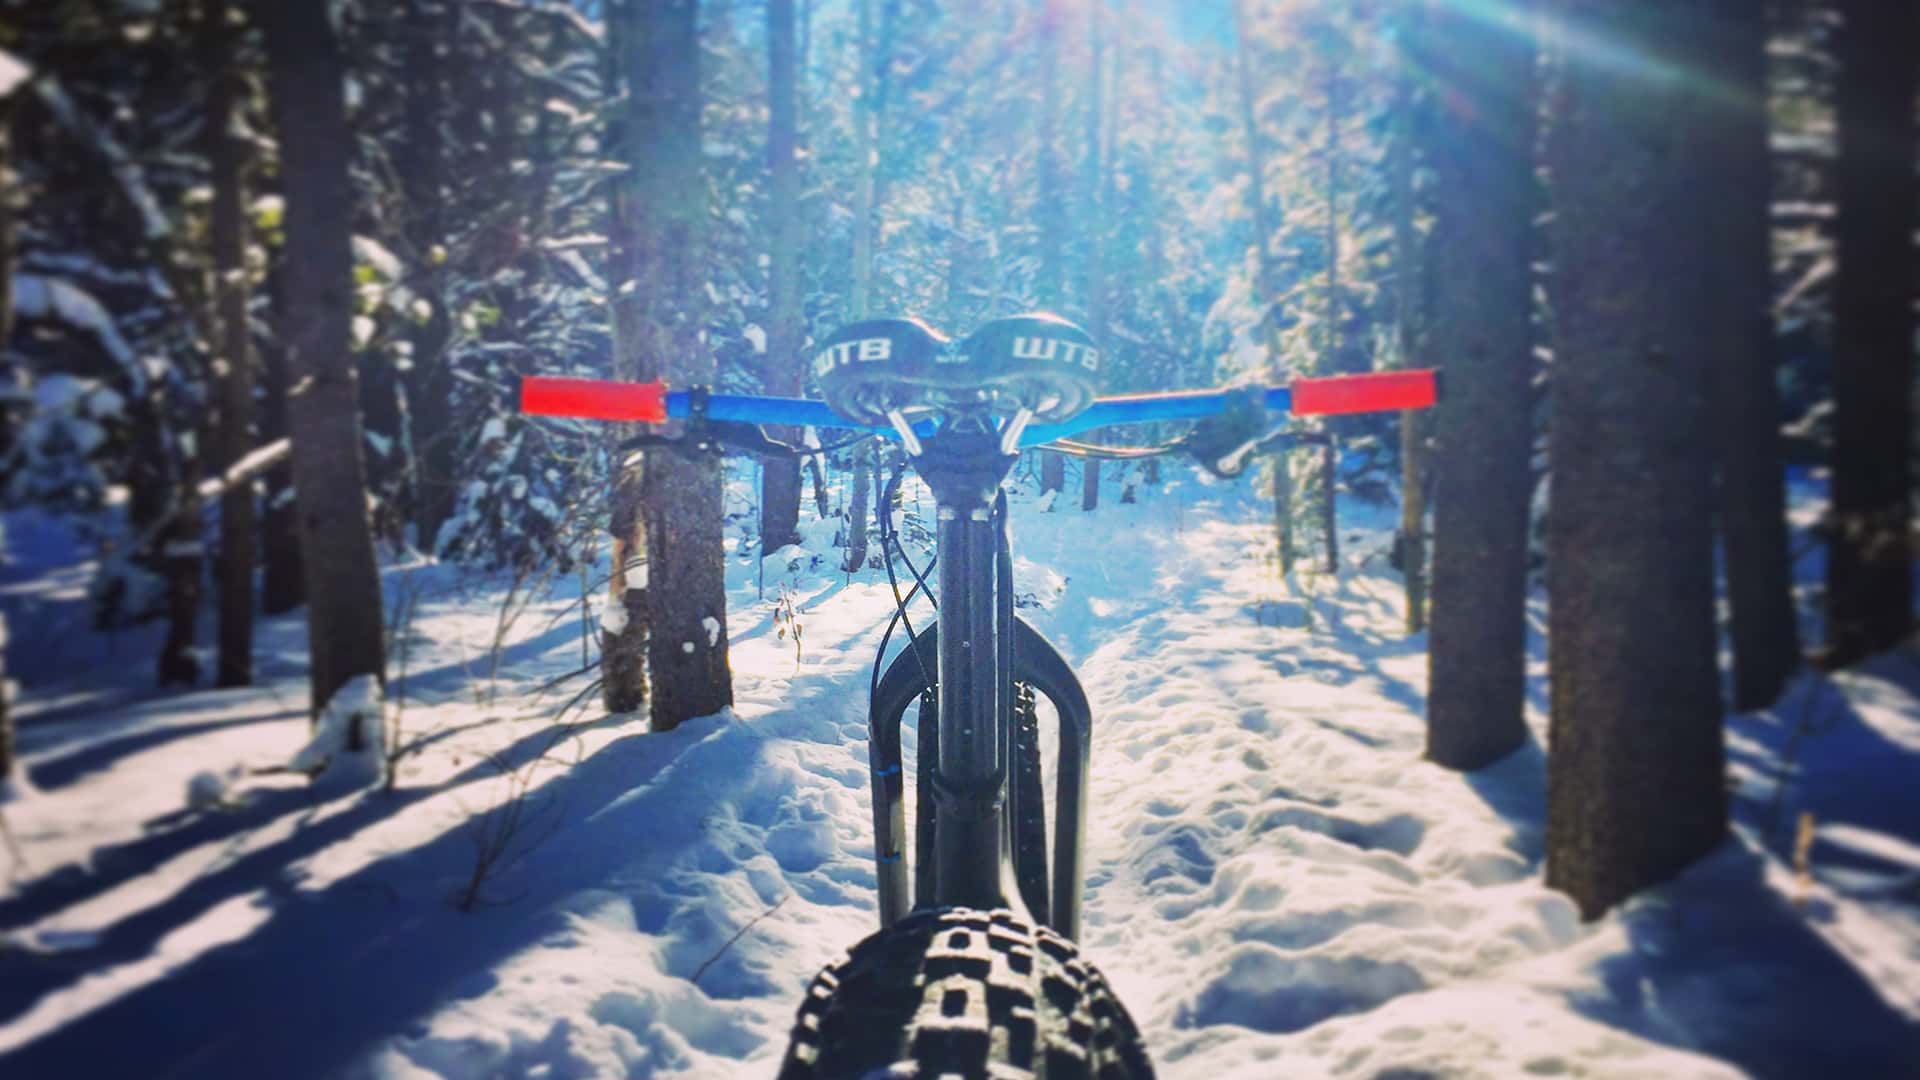 11Guided Winter Fat Biking Tours, Experience the mountain snow in a unique way!